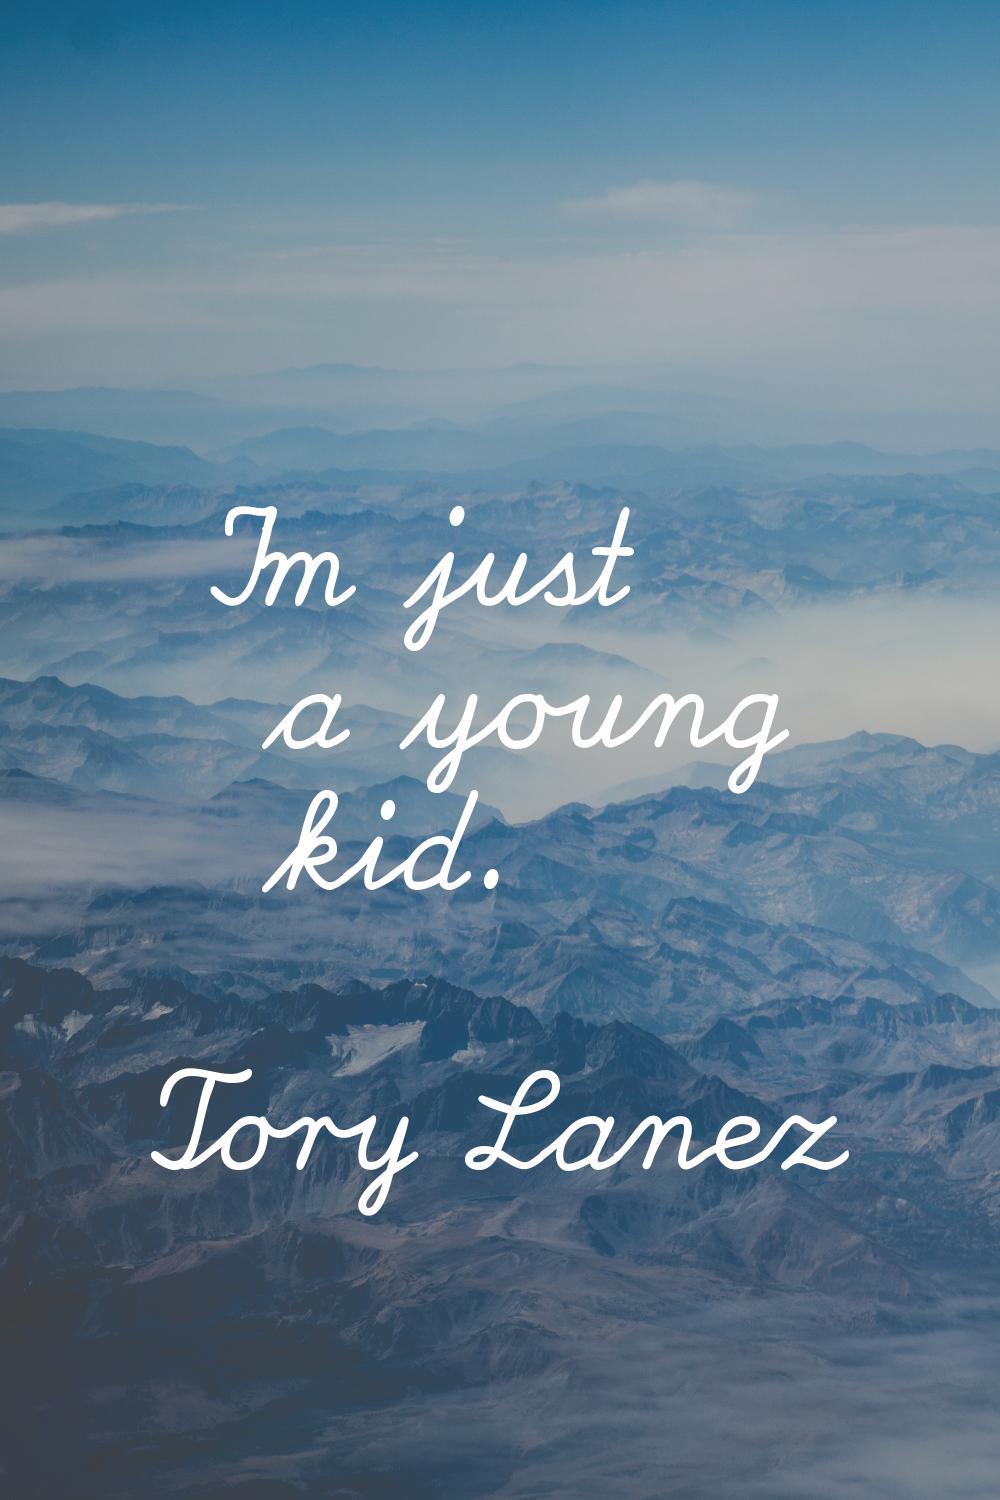 I'm just a young kid.